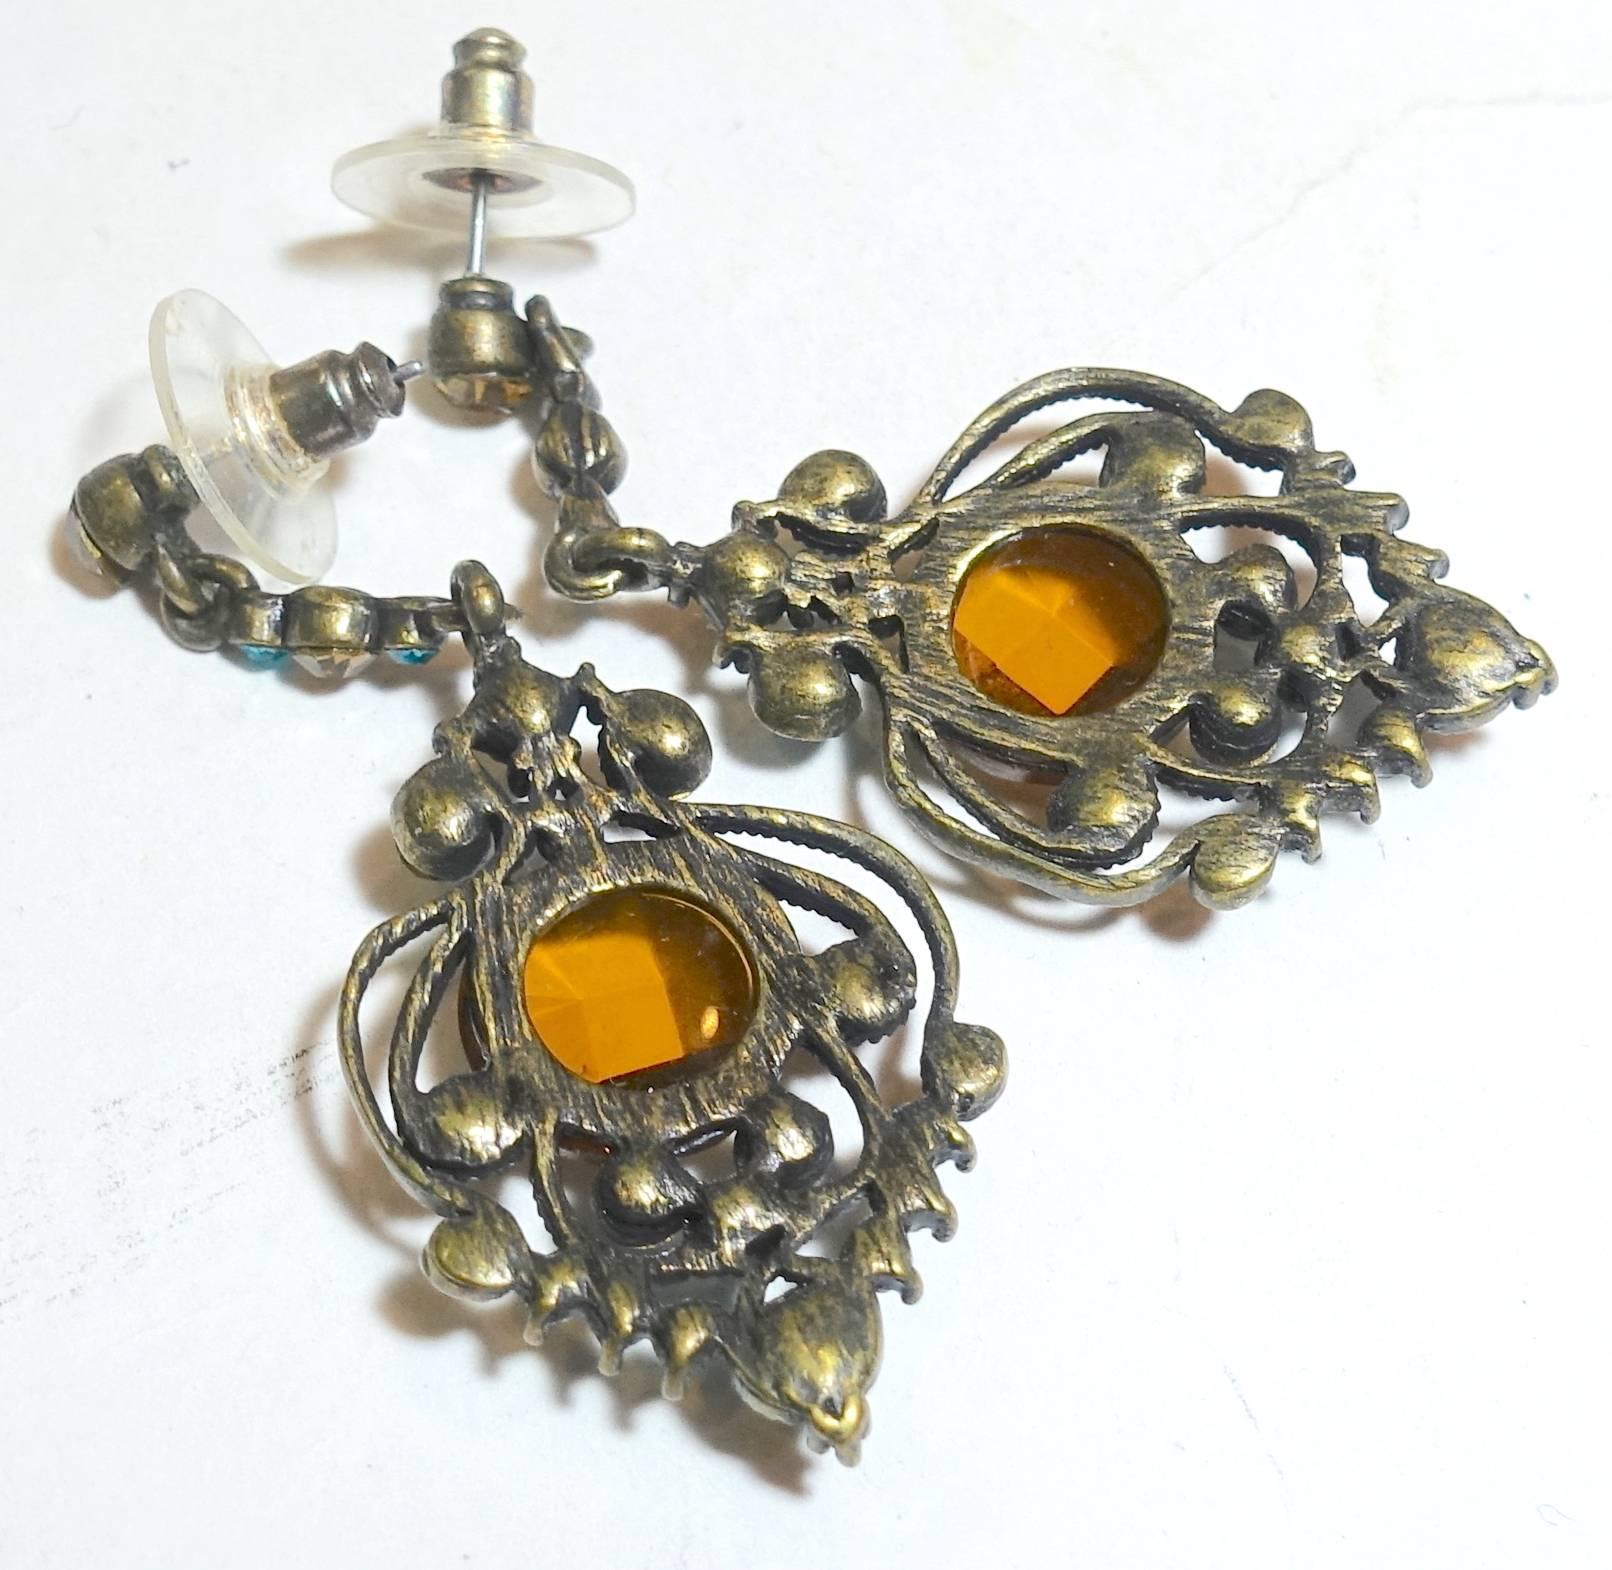 These earrings have a Victorian look to them but I believe they were made in the 60s.  They are pierced with citrine and aqua rhinestone leading down to a decorative center.  The center stone is a faceted citrine rhinestone with aqua and orange